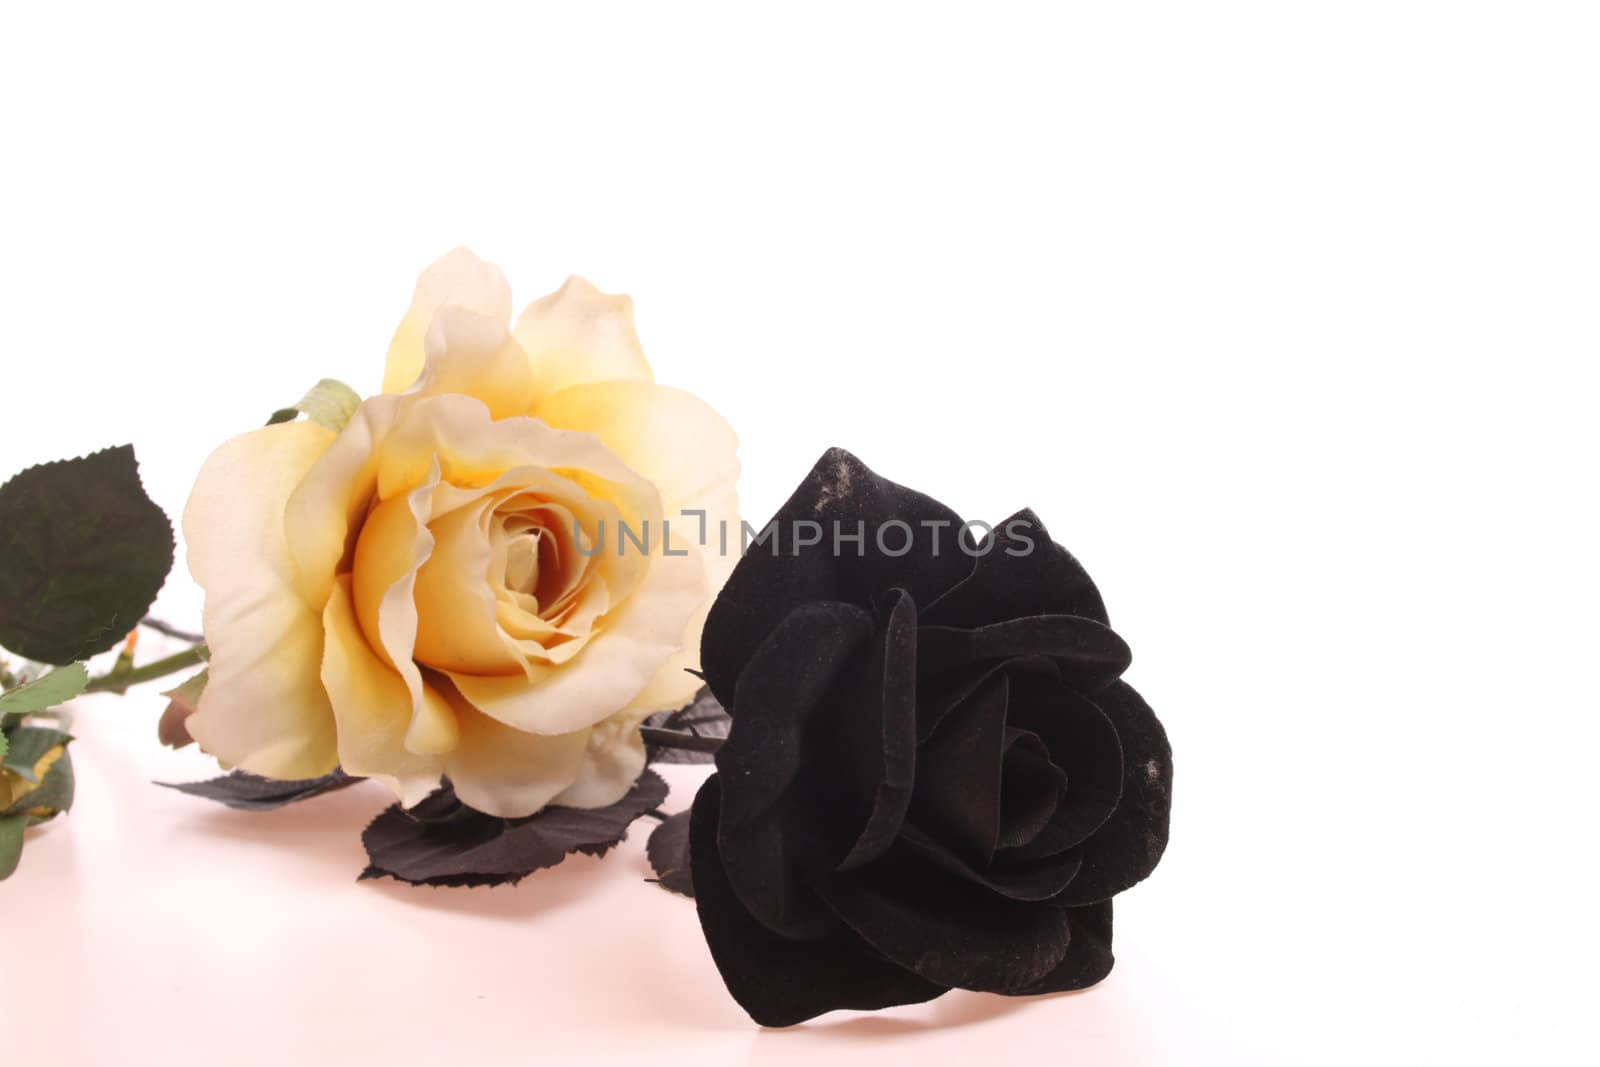 Black rose and yellow rose over white isolated against a white background with copy space